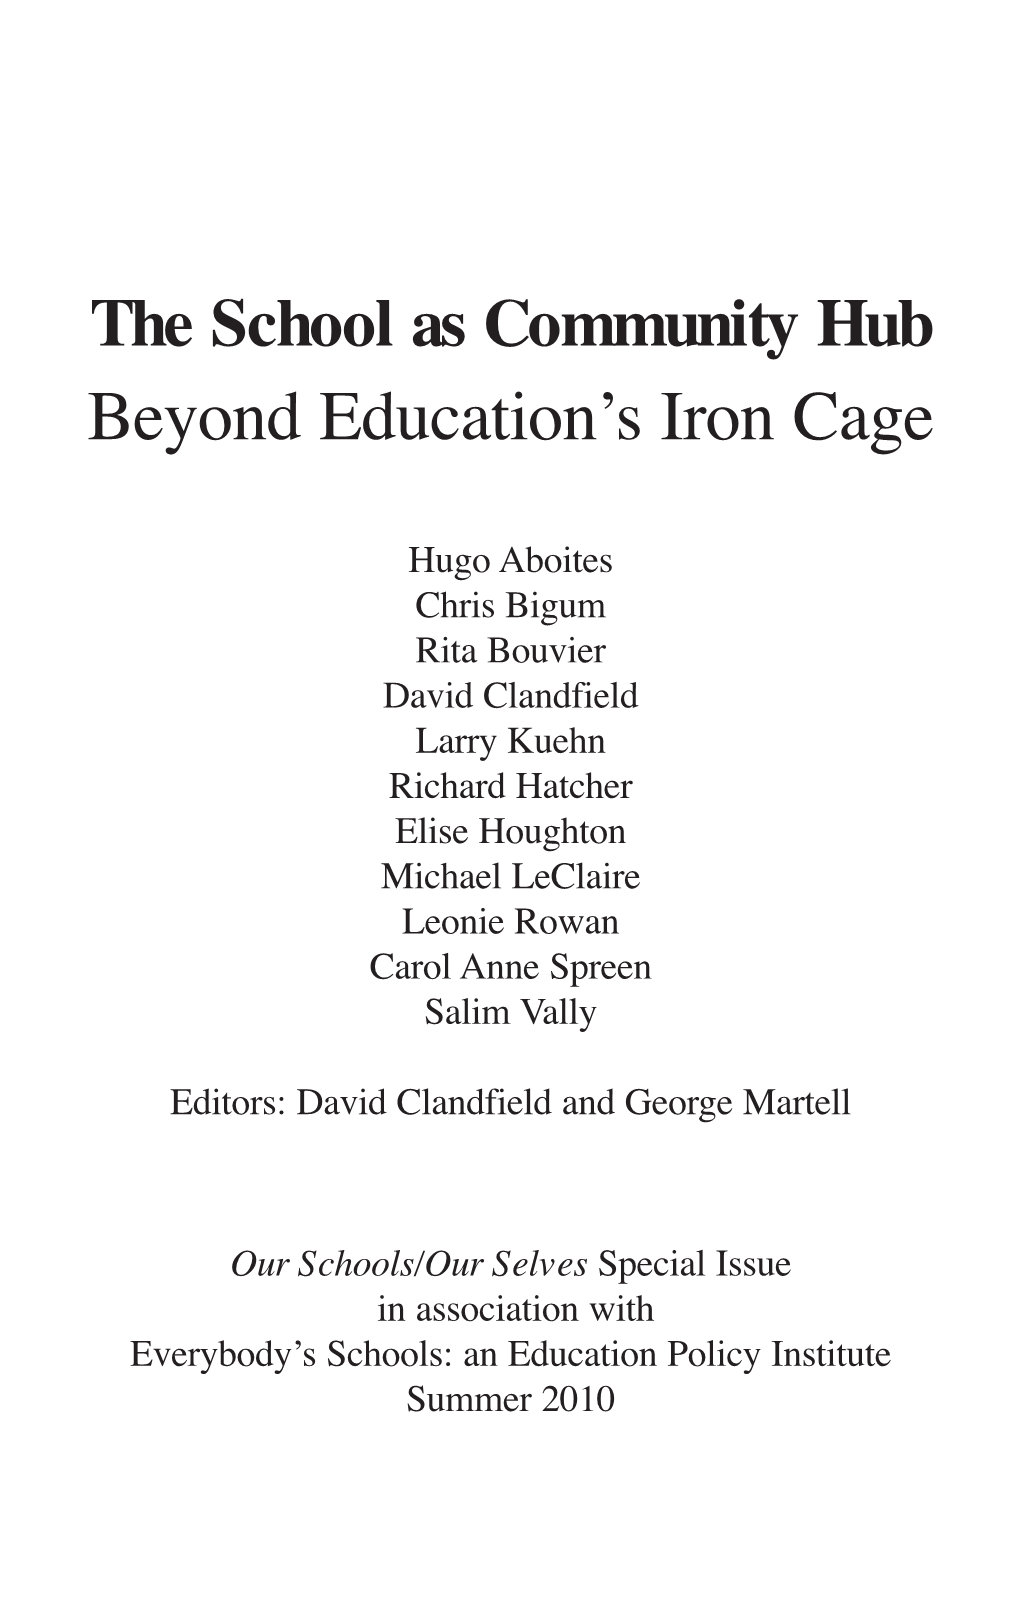 Beyond Education's Iron Cage